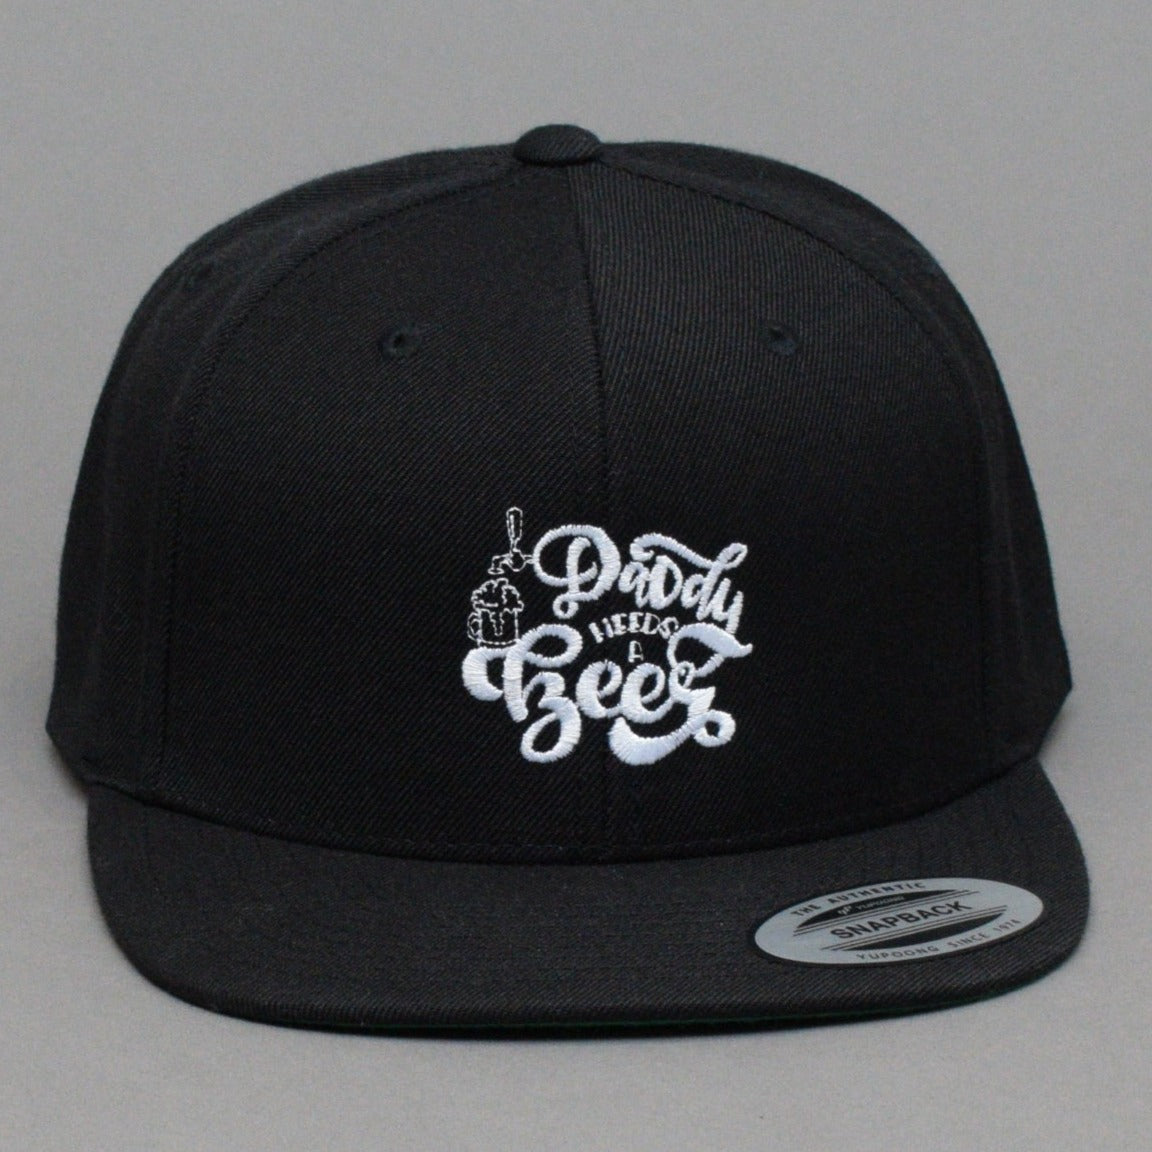 Ideal - Daddy Needs A Beer - Snapback - Black